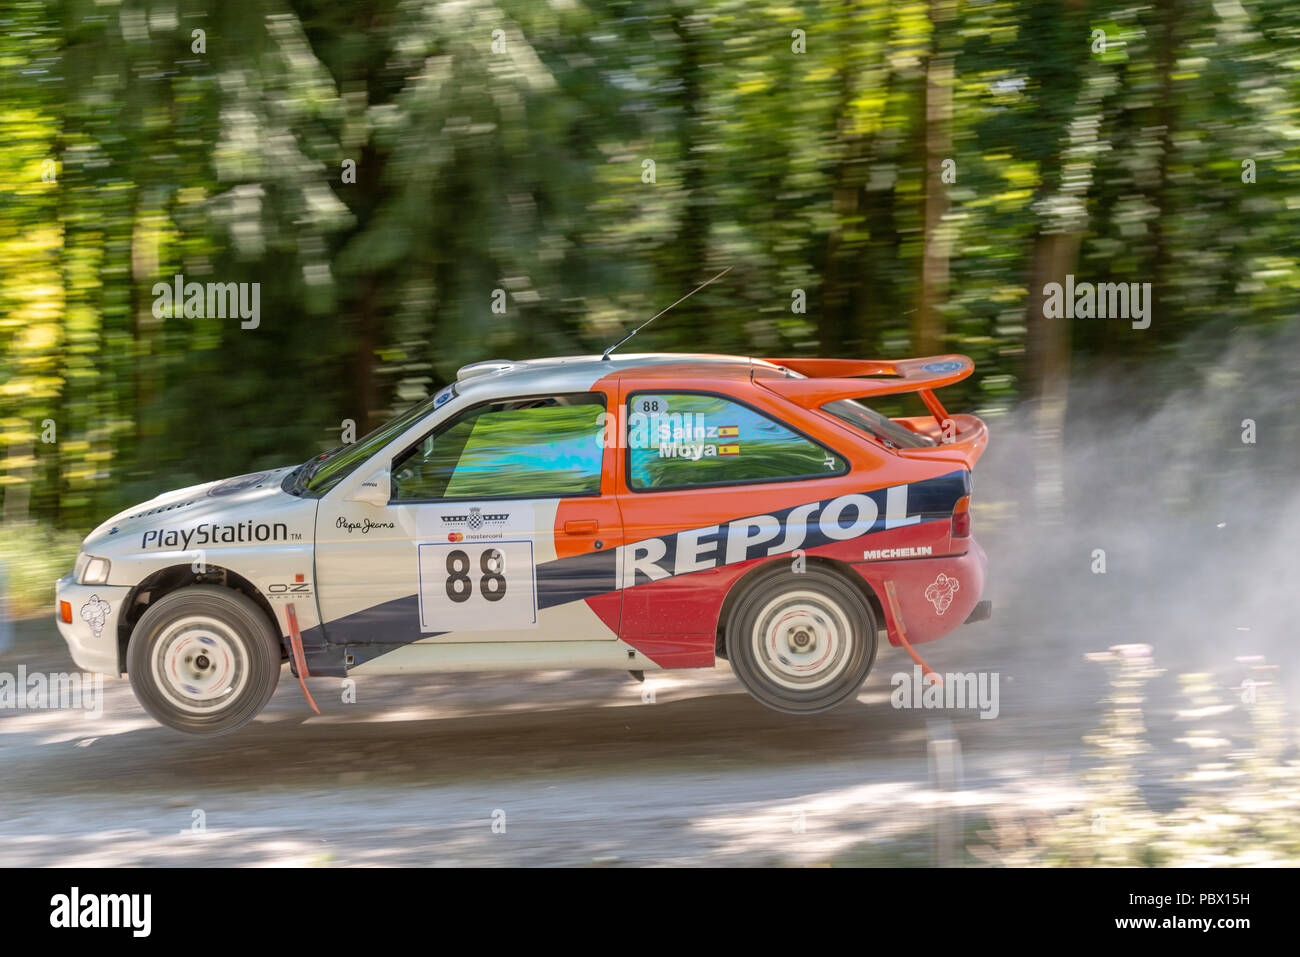 A Ford Escort Cosworth rally car takes to the air over a jump in the rally stages at the Goodwood Festival of Speed 2018 Stock Photo